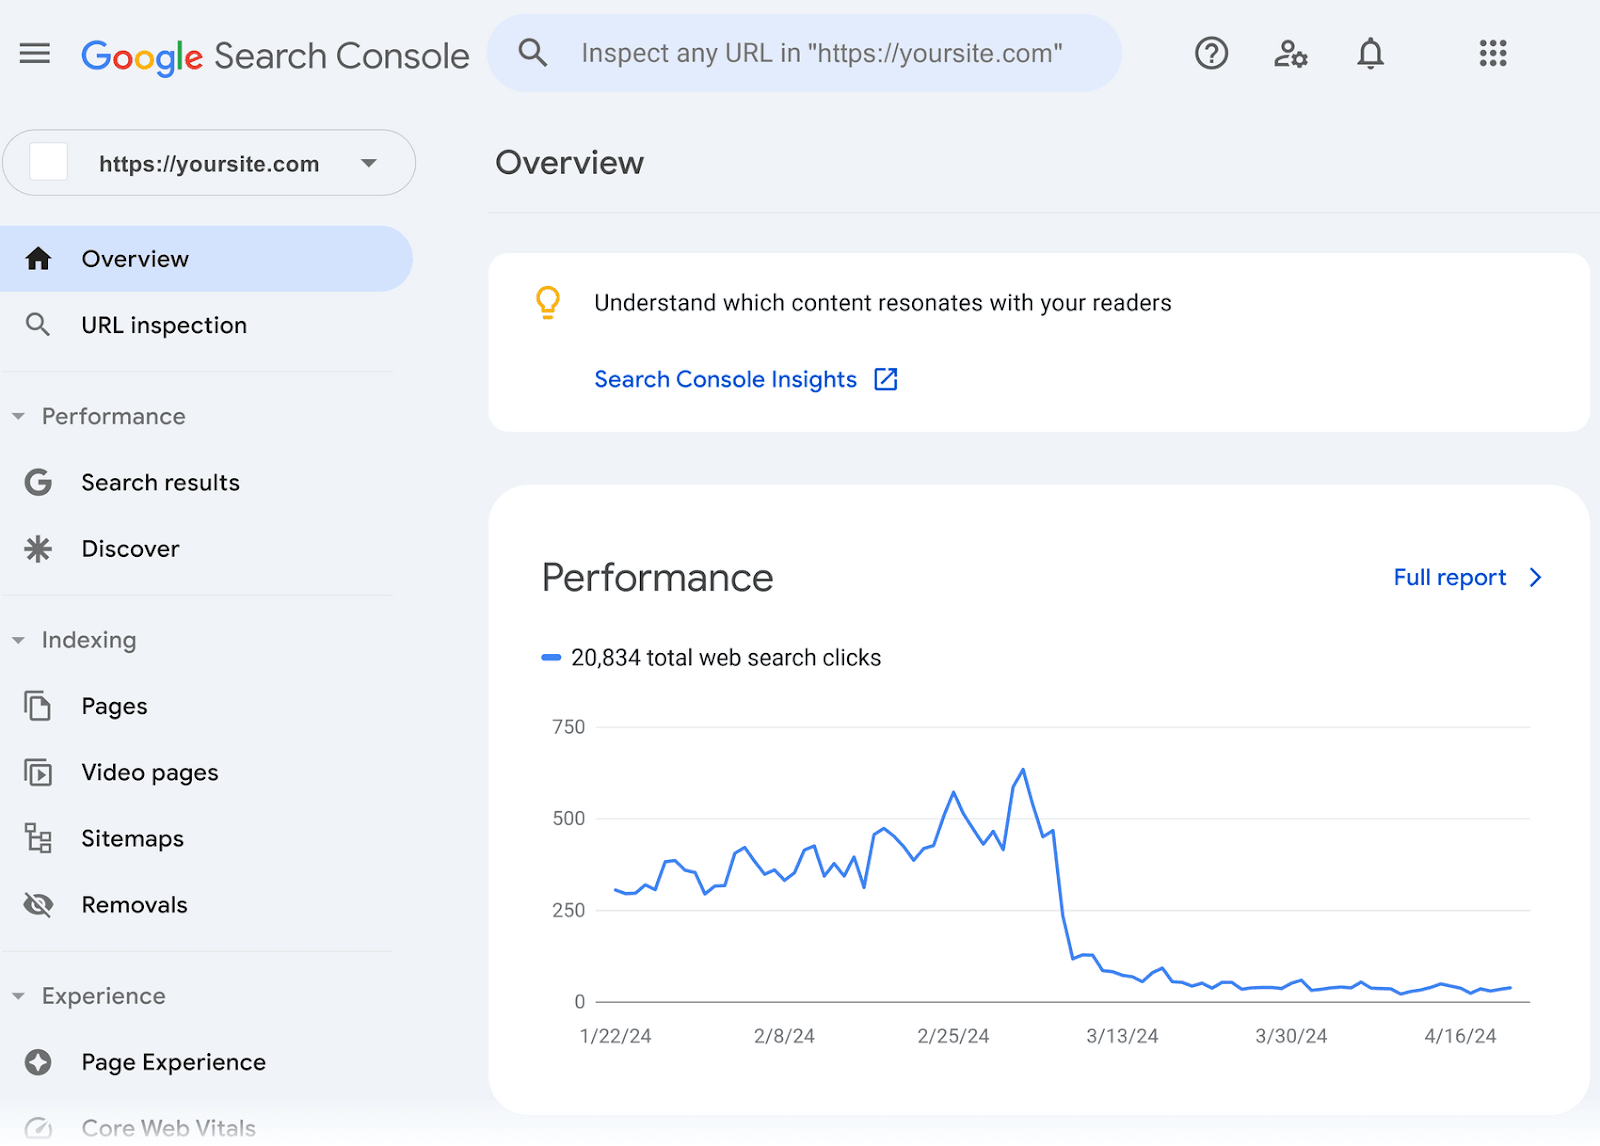 Google Search Console interface showing the overview report with a performance graph for web search clicks over time.